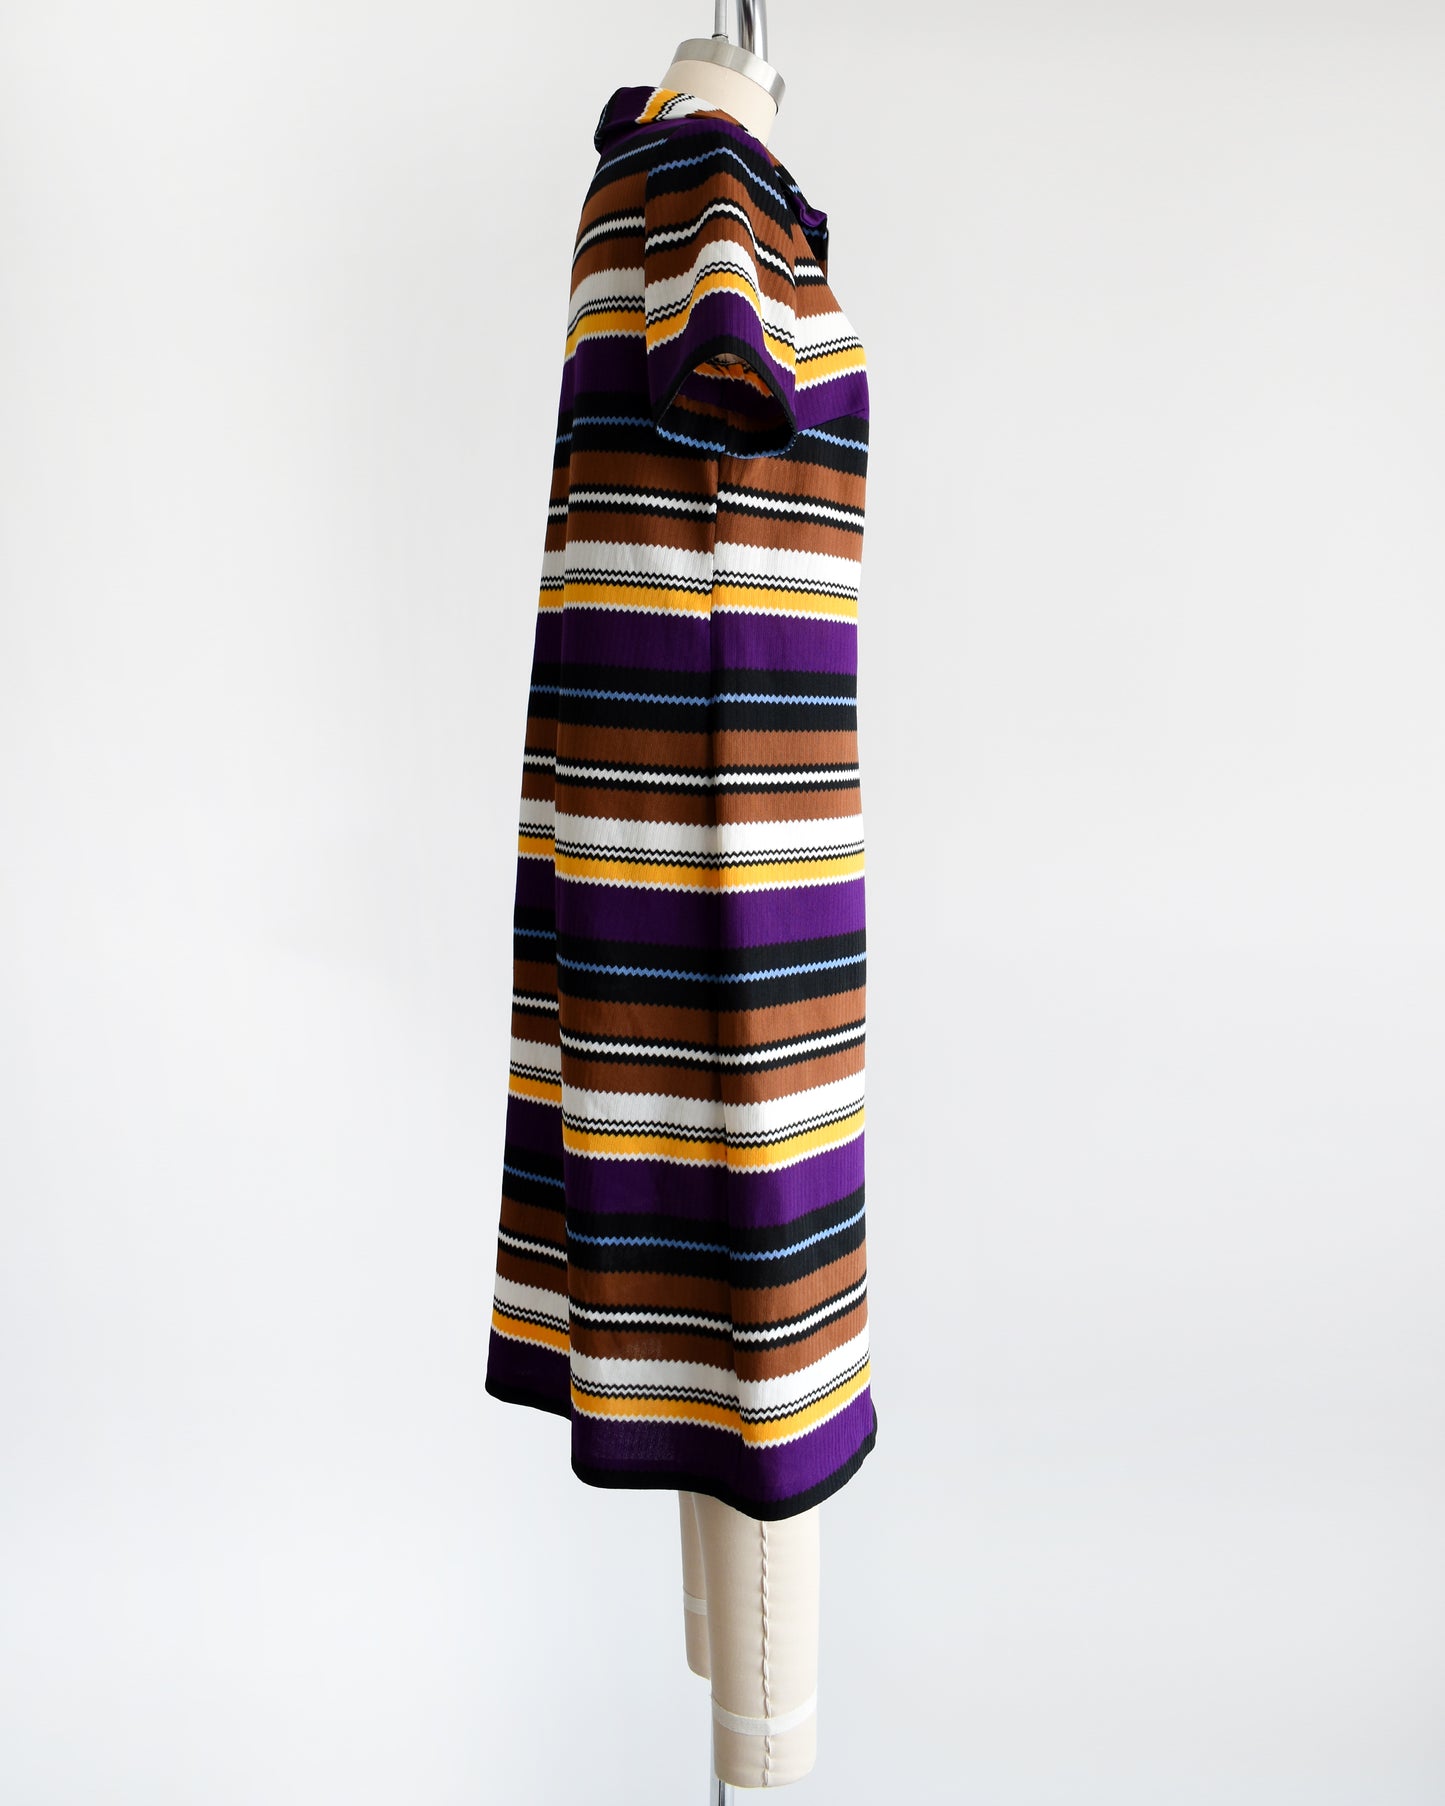 Side view of a vintage 1970s striped mod dress that has black, brown, white, blue, yellow, and purple horizontal stripes with zigzag edges.